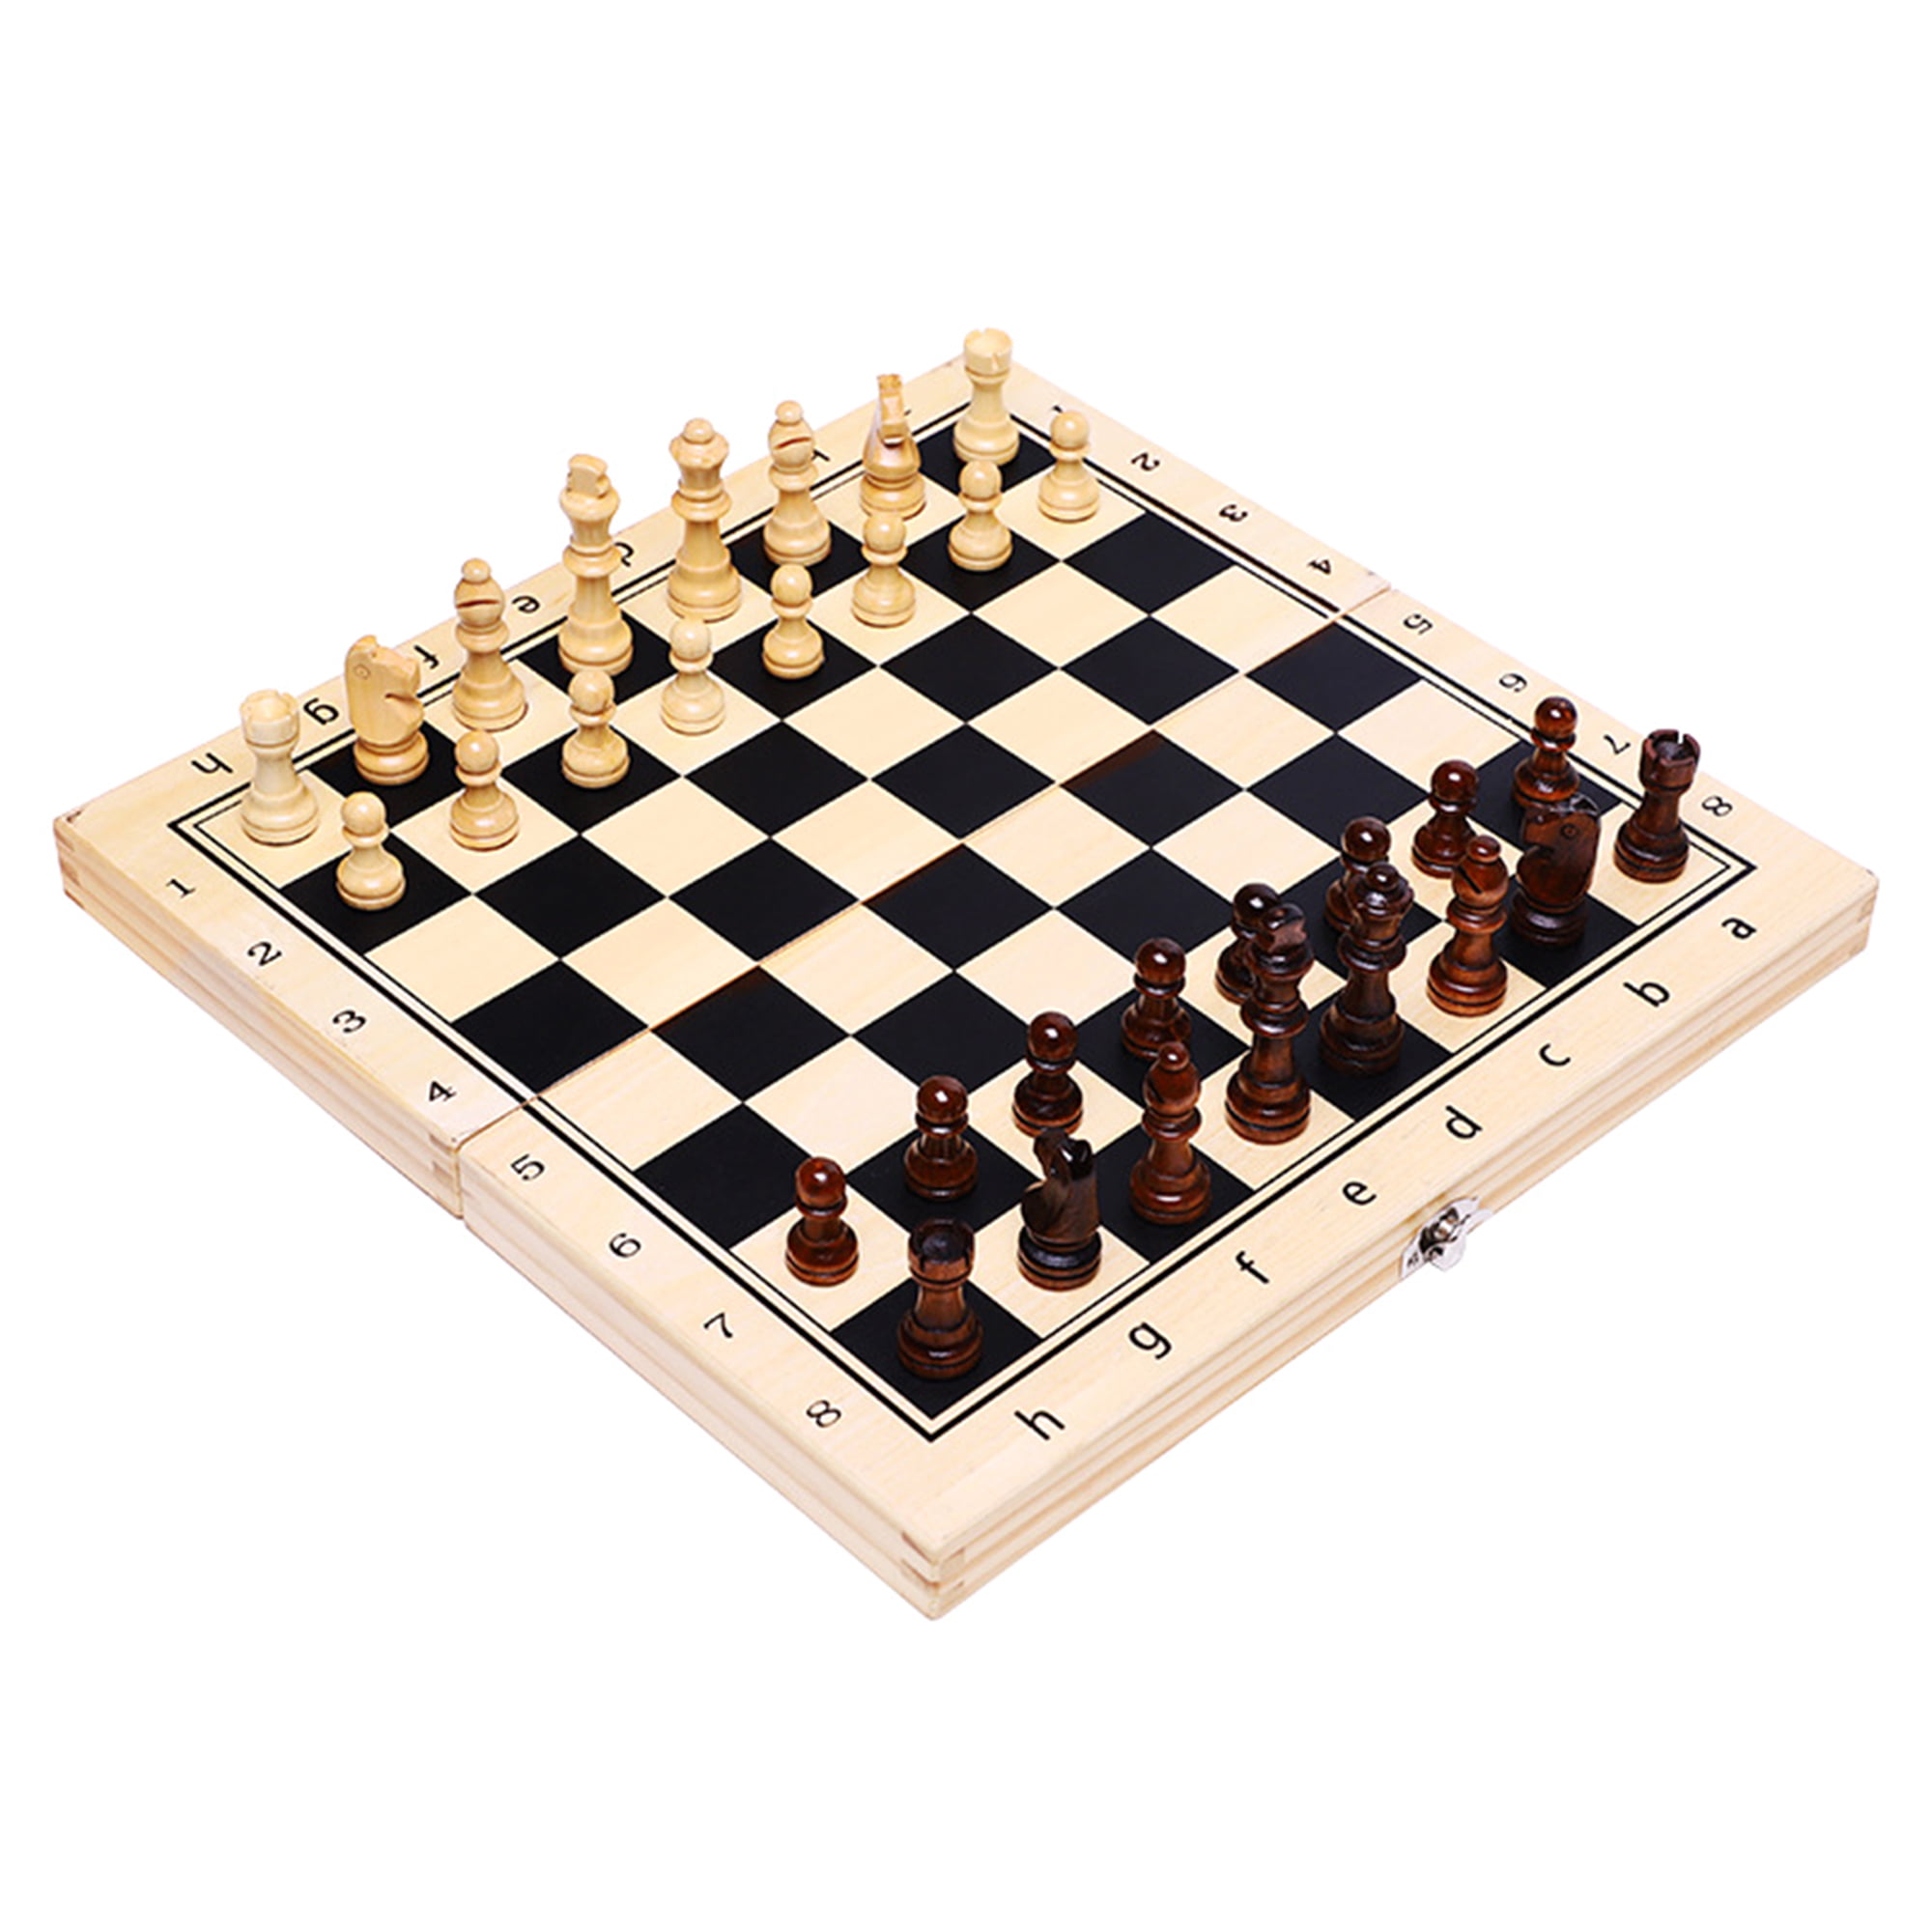 Details about   Chess Wooden Set Folding Chessboard Pieces Wood Board Wooden Chess Game Set US 